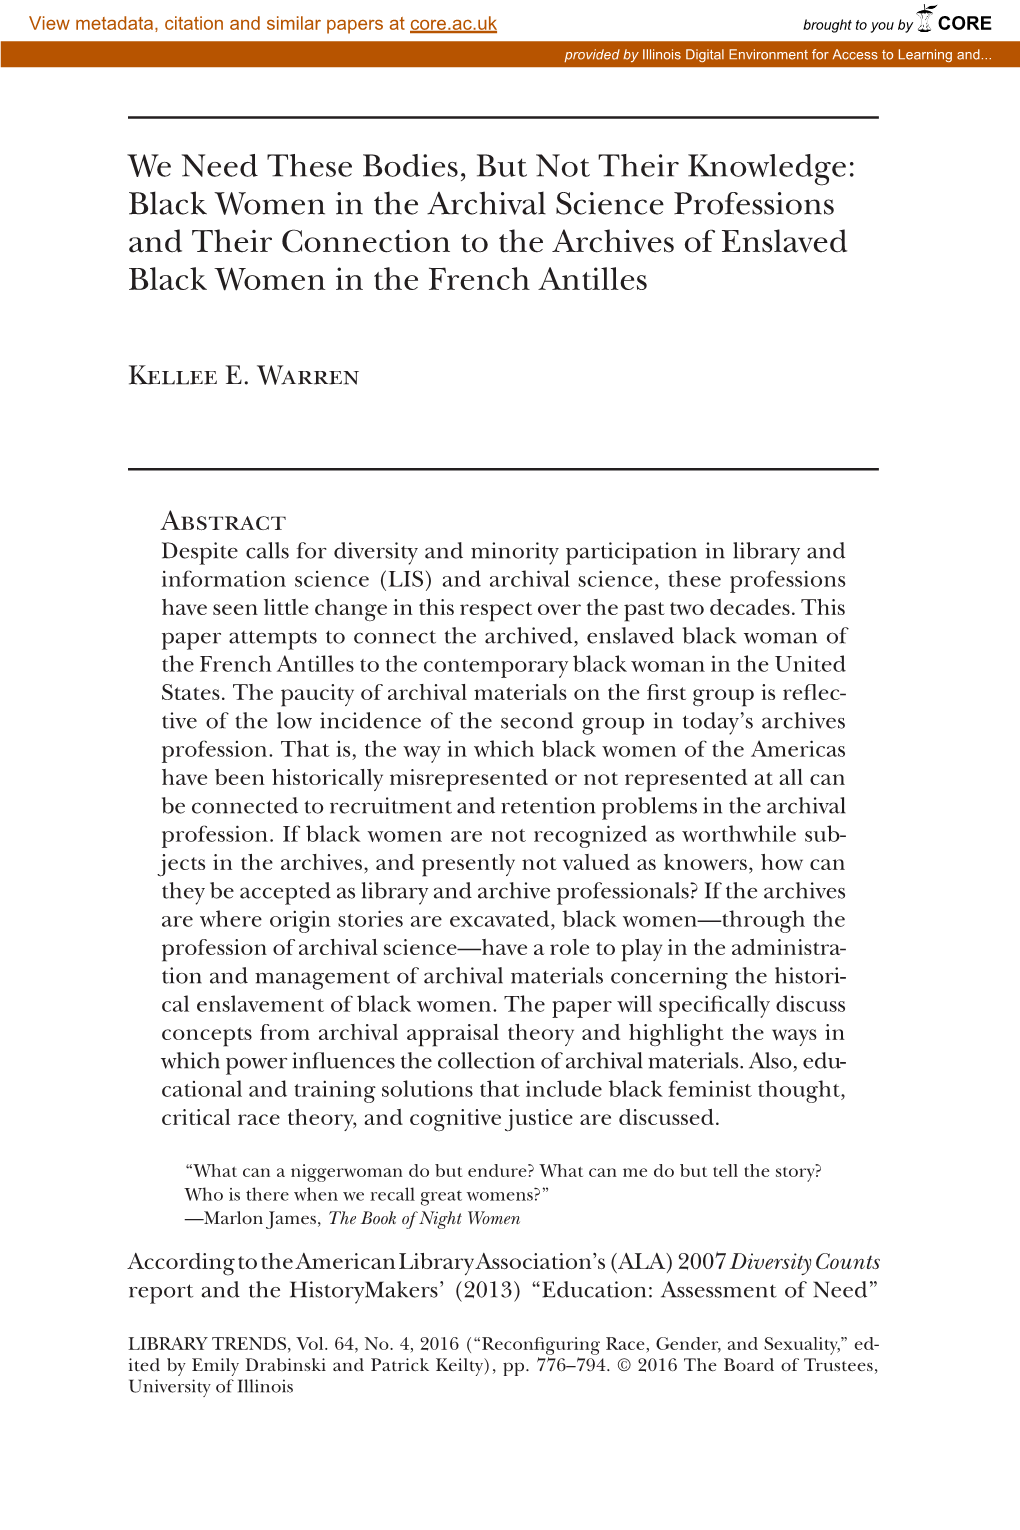 Black Women in the Archival Science Professions and Their Connection to the Archives of Enslaved Black Women in the French Antilles